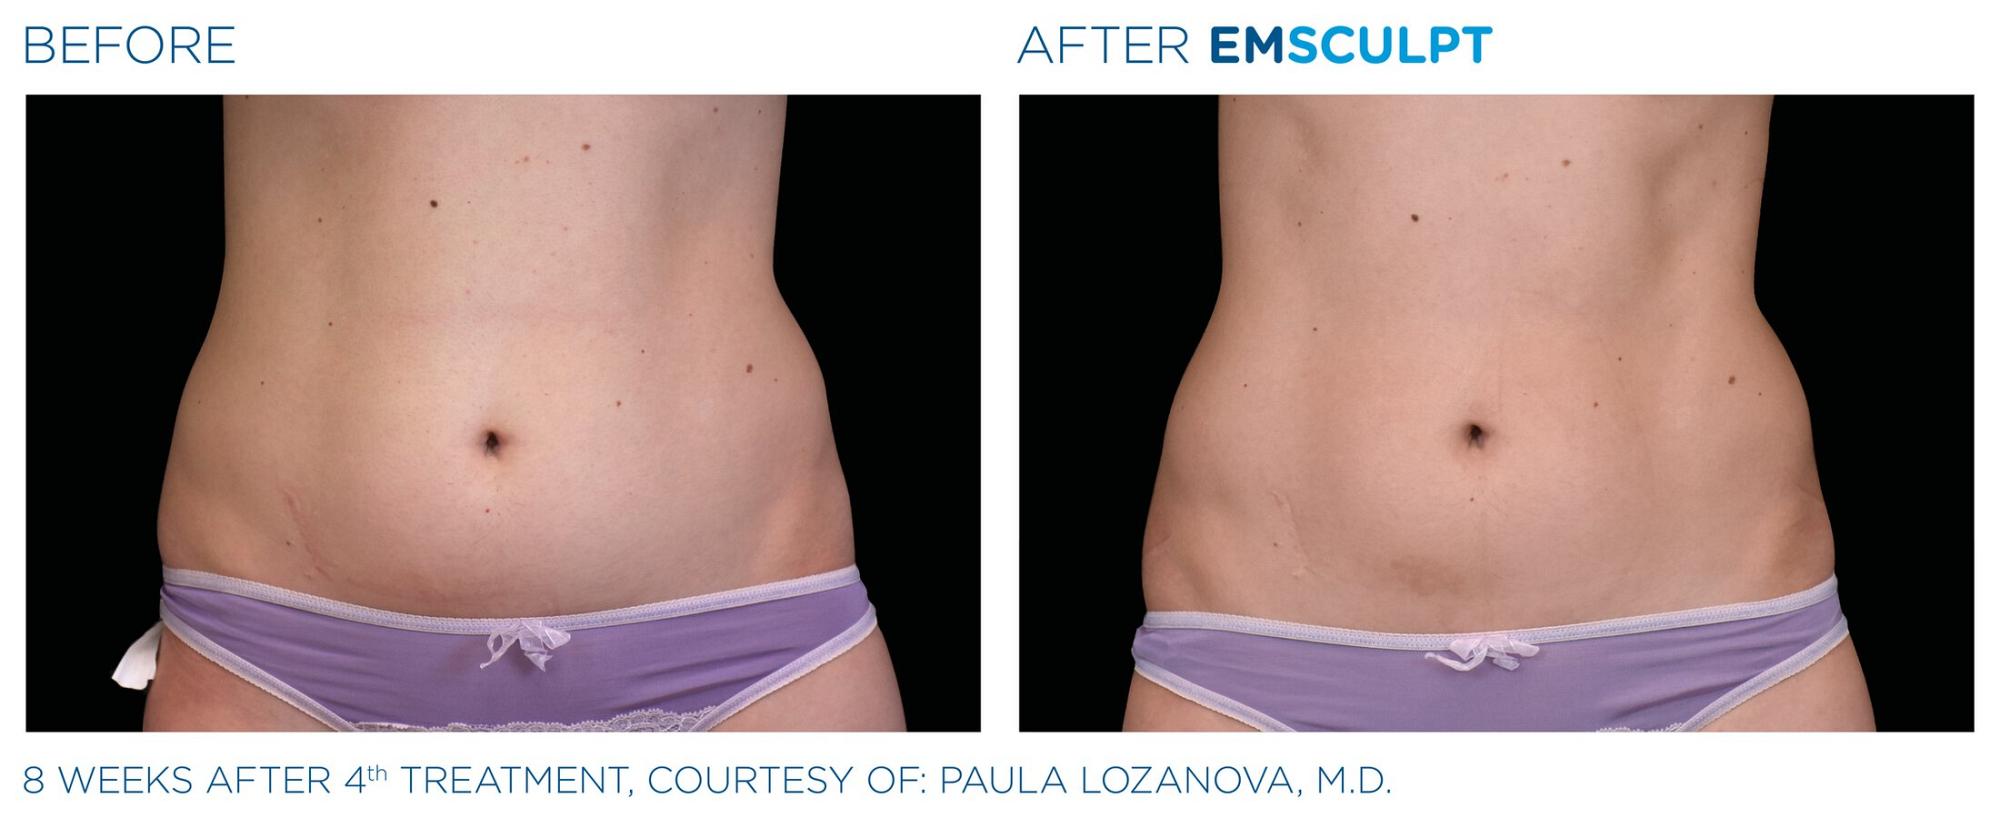 EmSculpt before and after